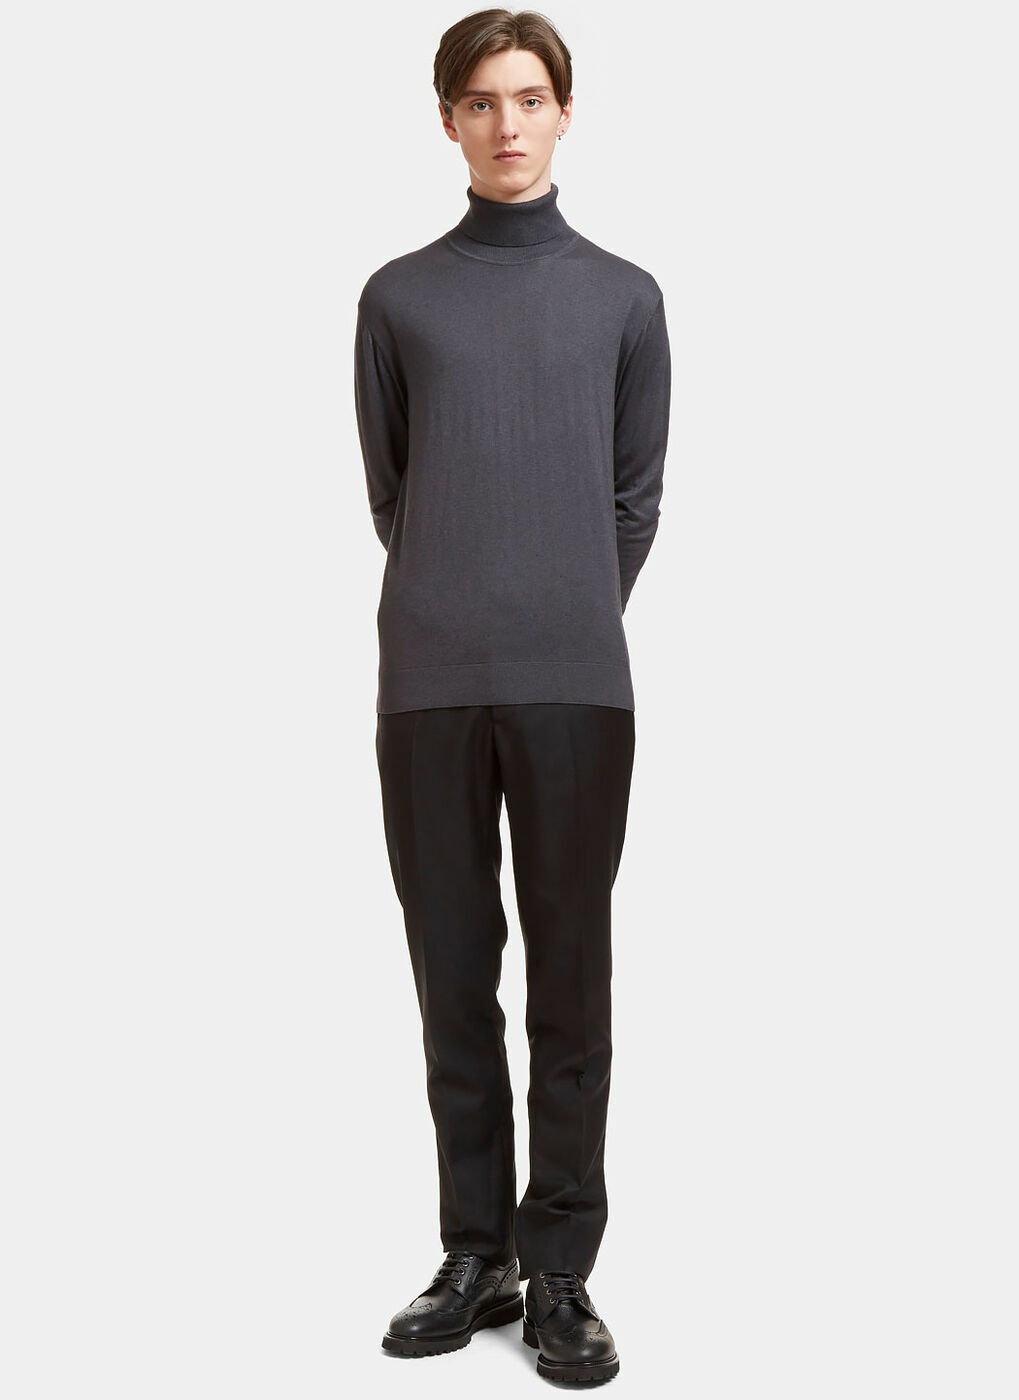 Aiezen Ribbed Roll Neck Sweater male Grey